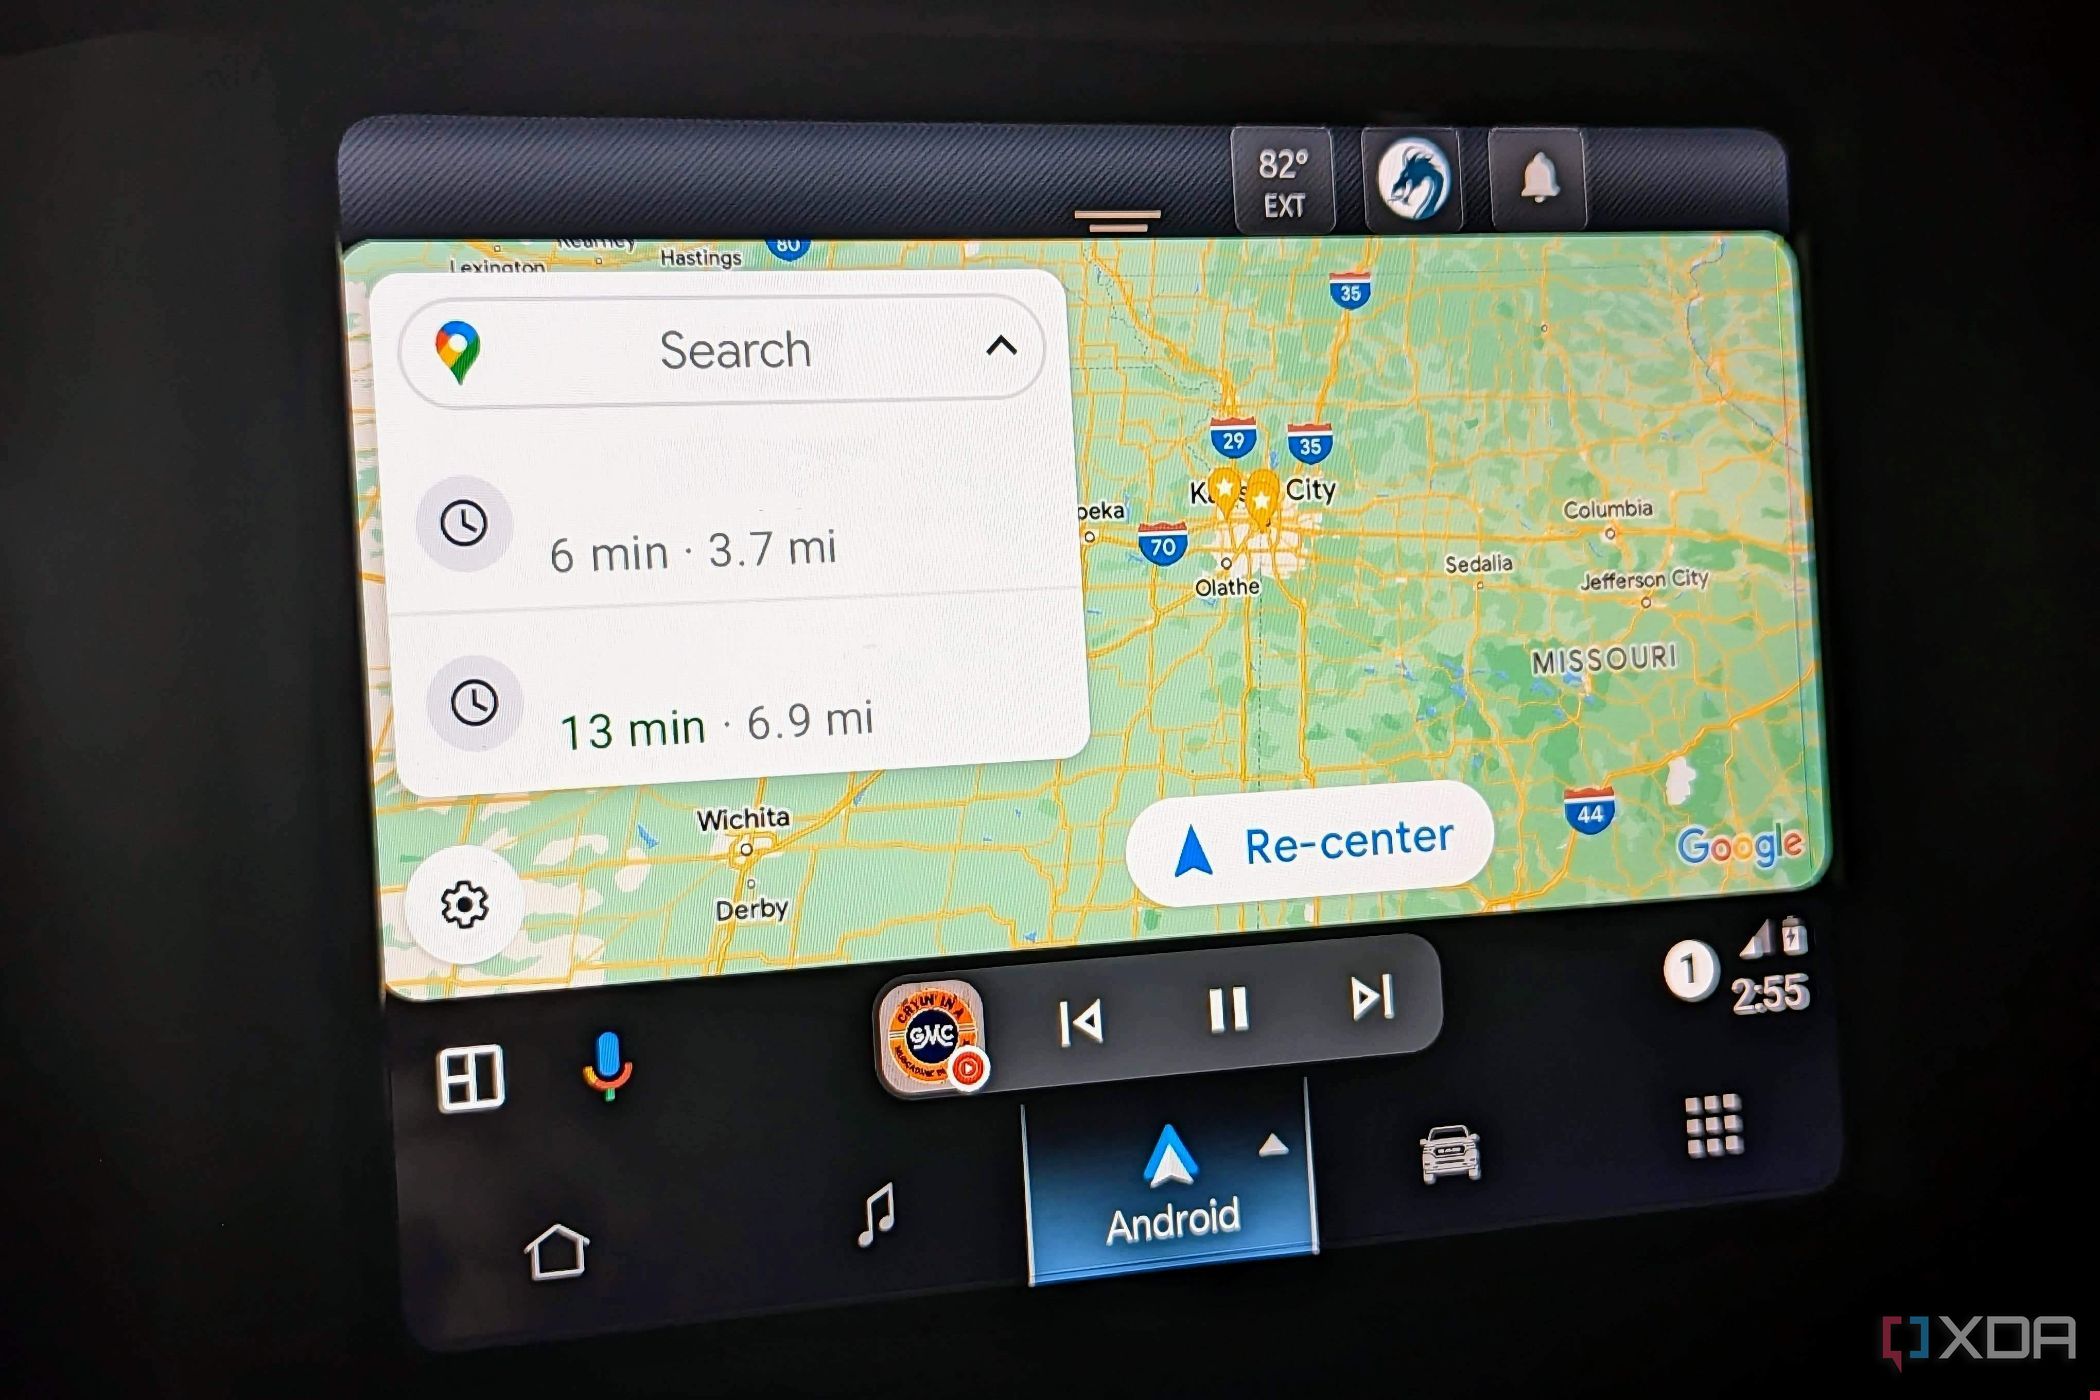 Android Auto is getting a major UI update